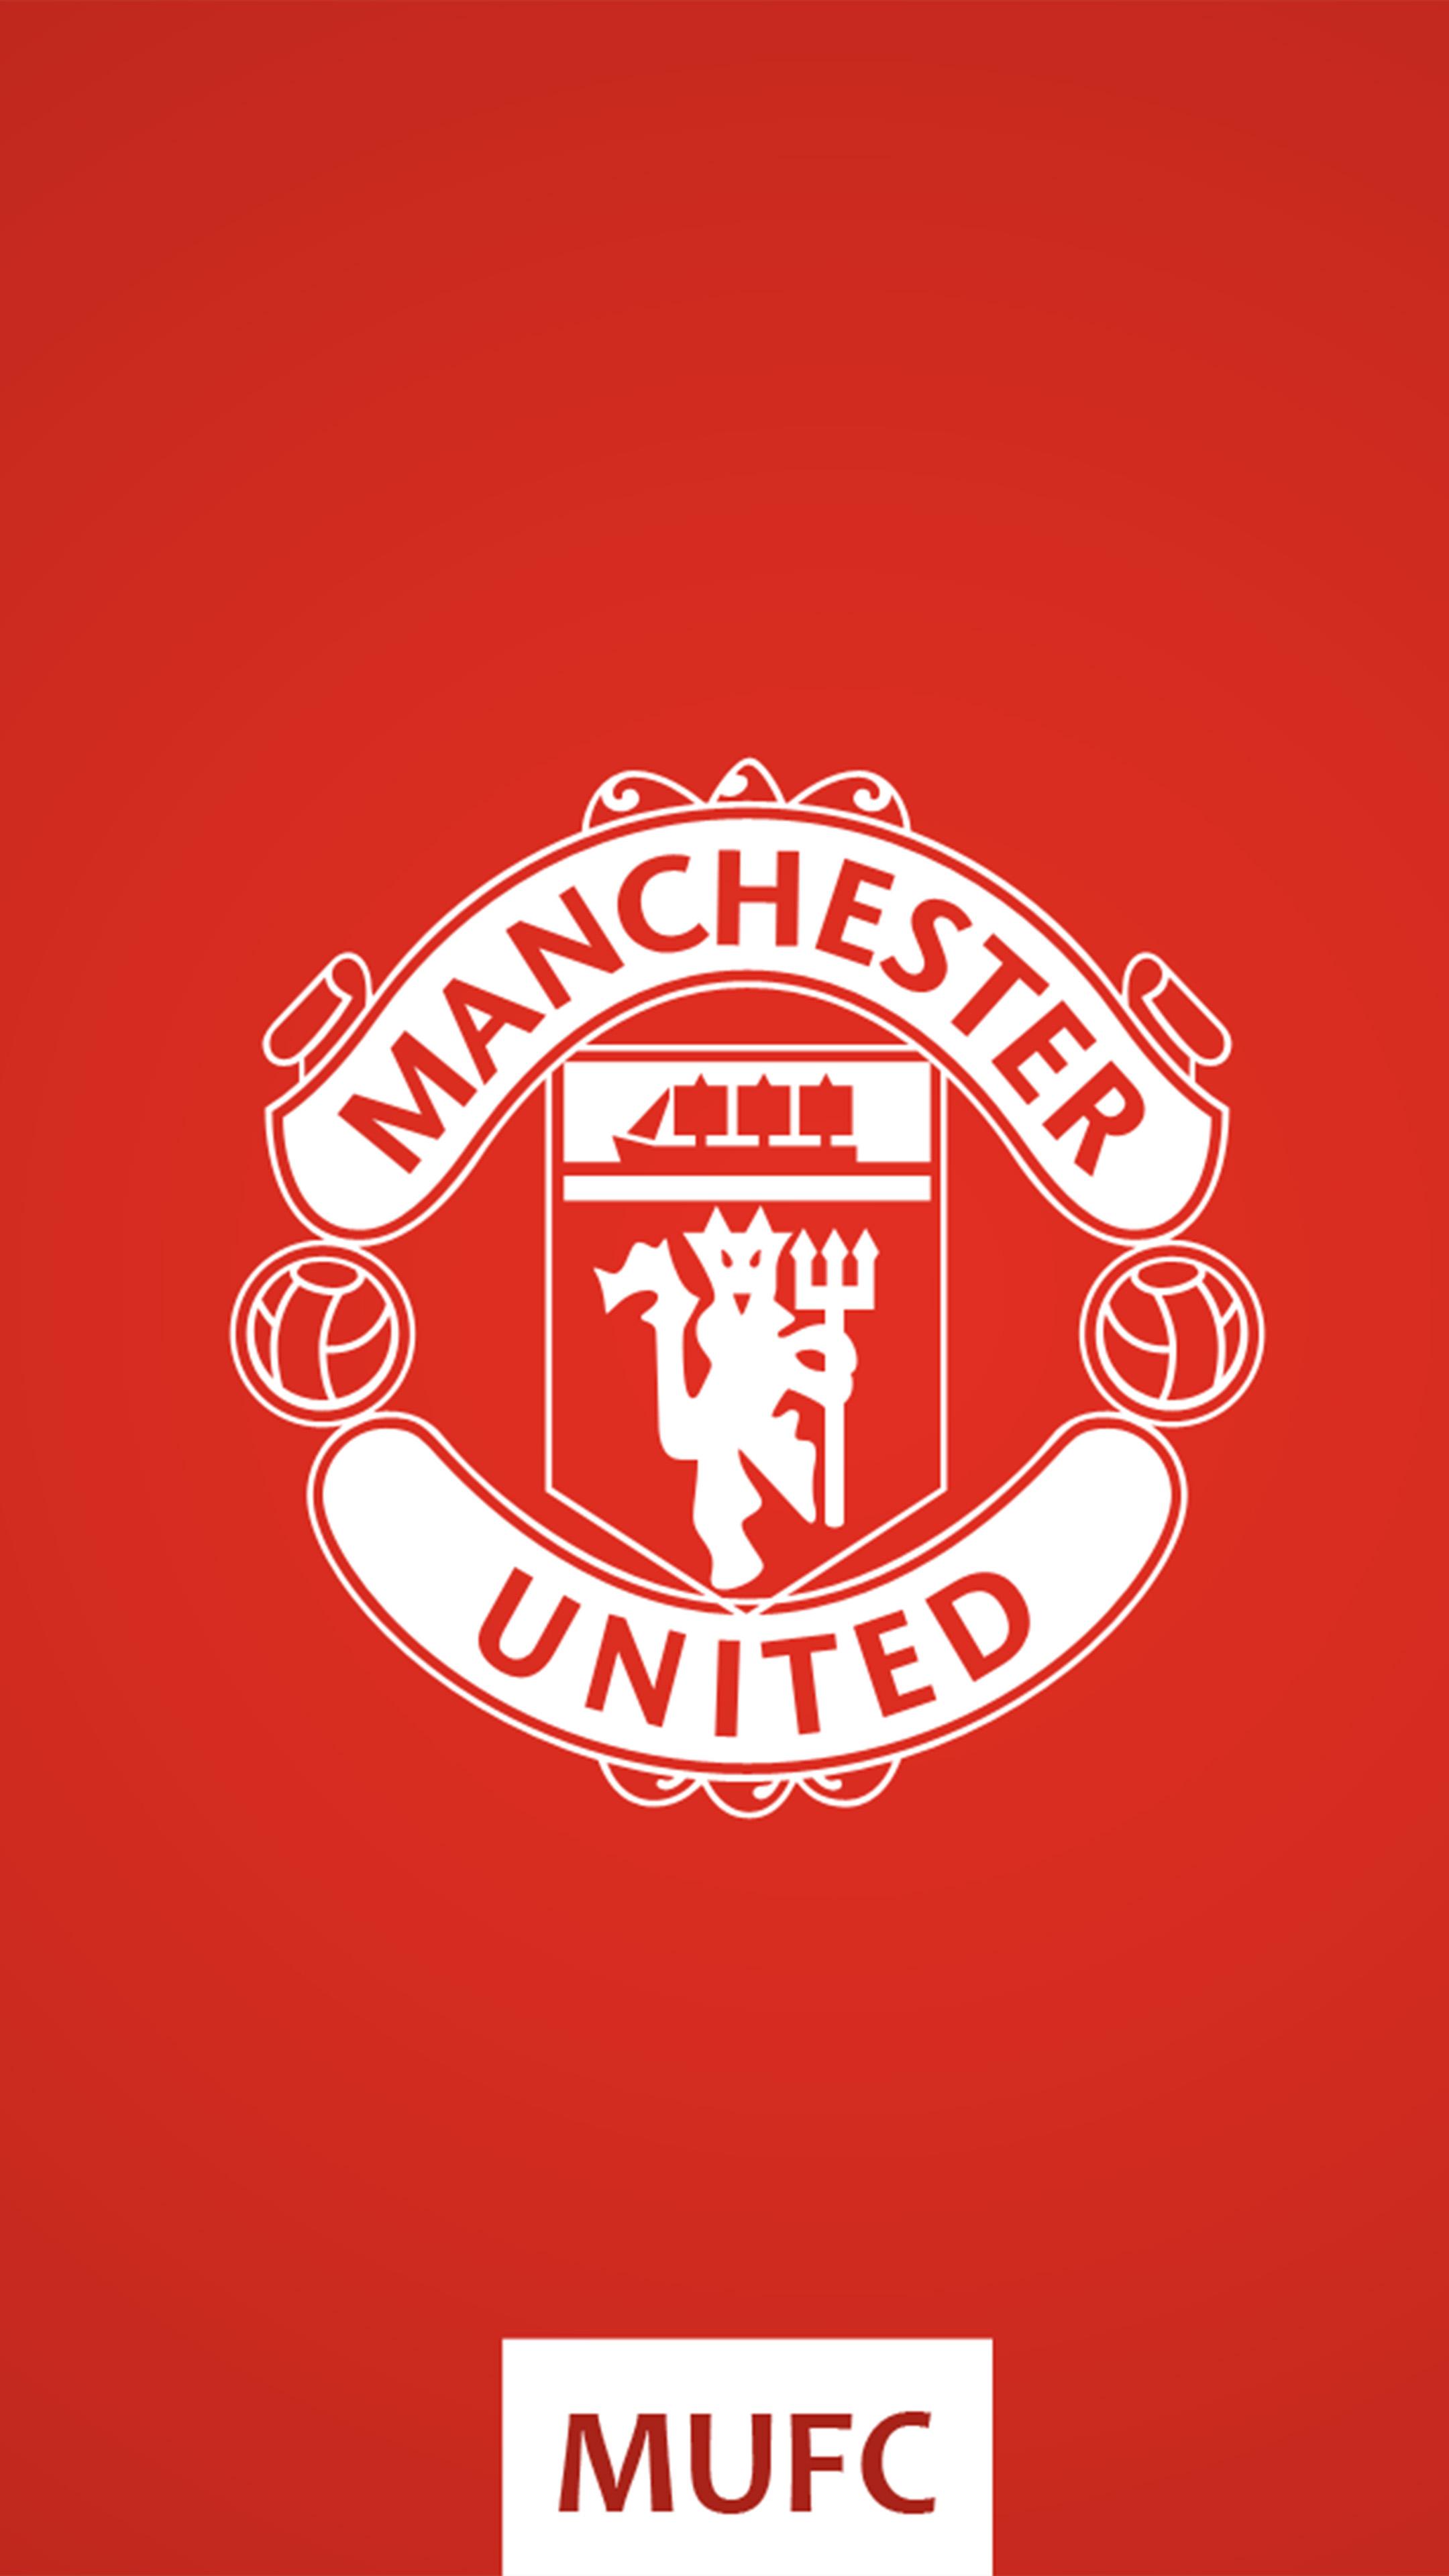 Manchester United Hd Iphone Wallpapers Wallpaper Cave